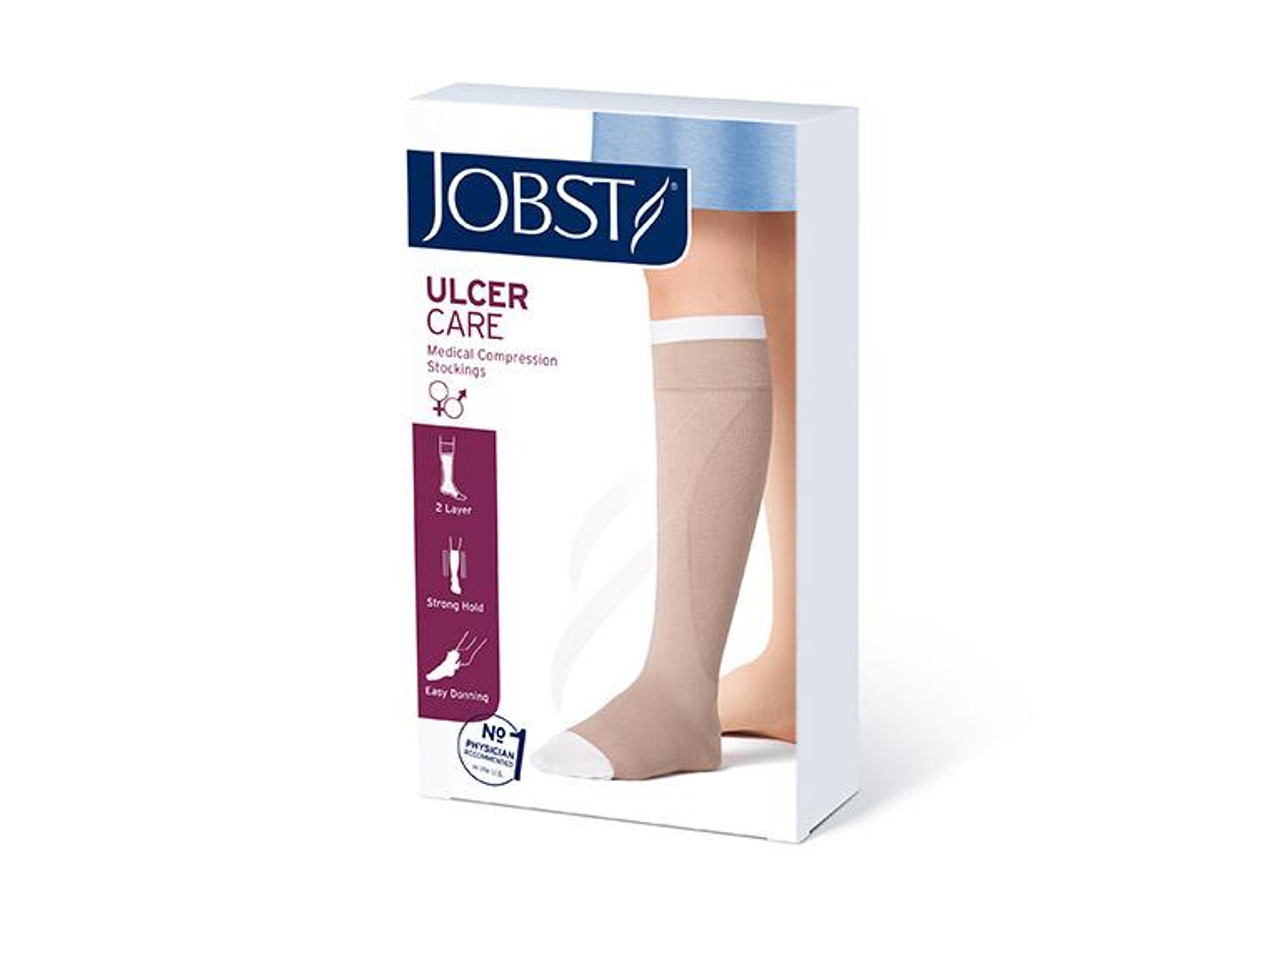 JOBST® UlcerCare Liners, Box of 3